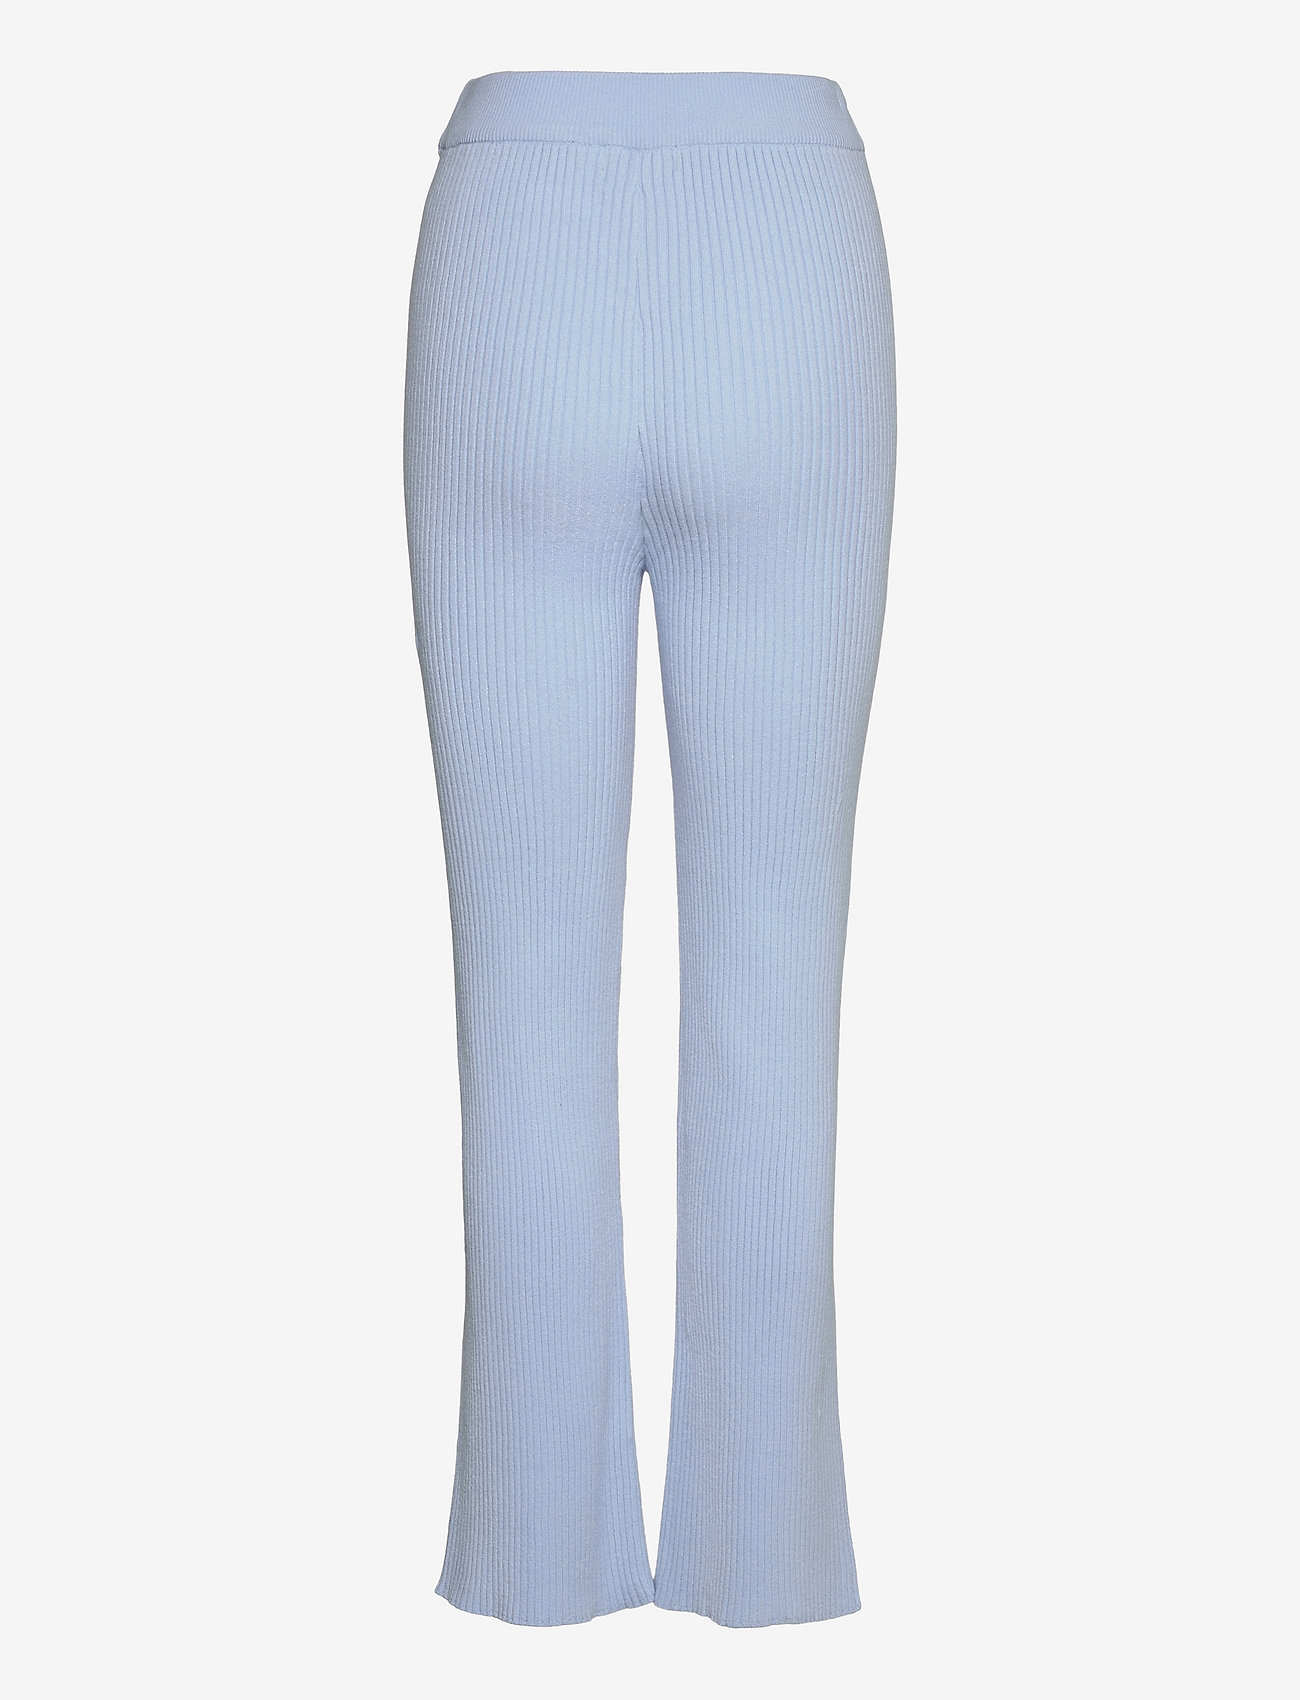 OW Collection - AVERY Pants - dames - 026 - blue - 1